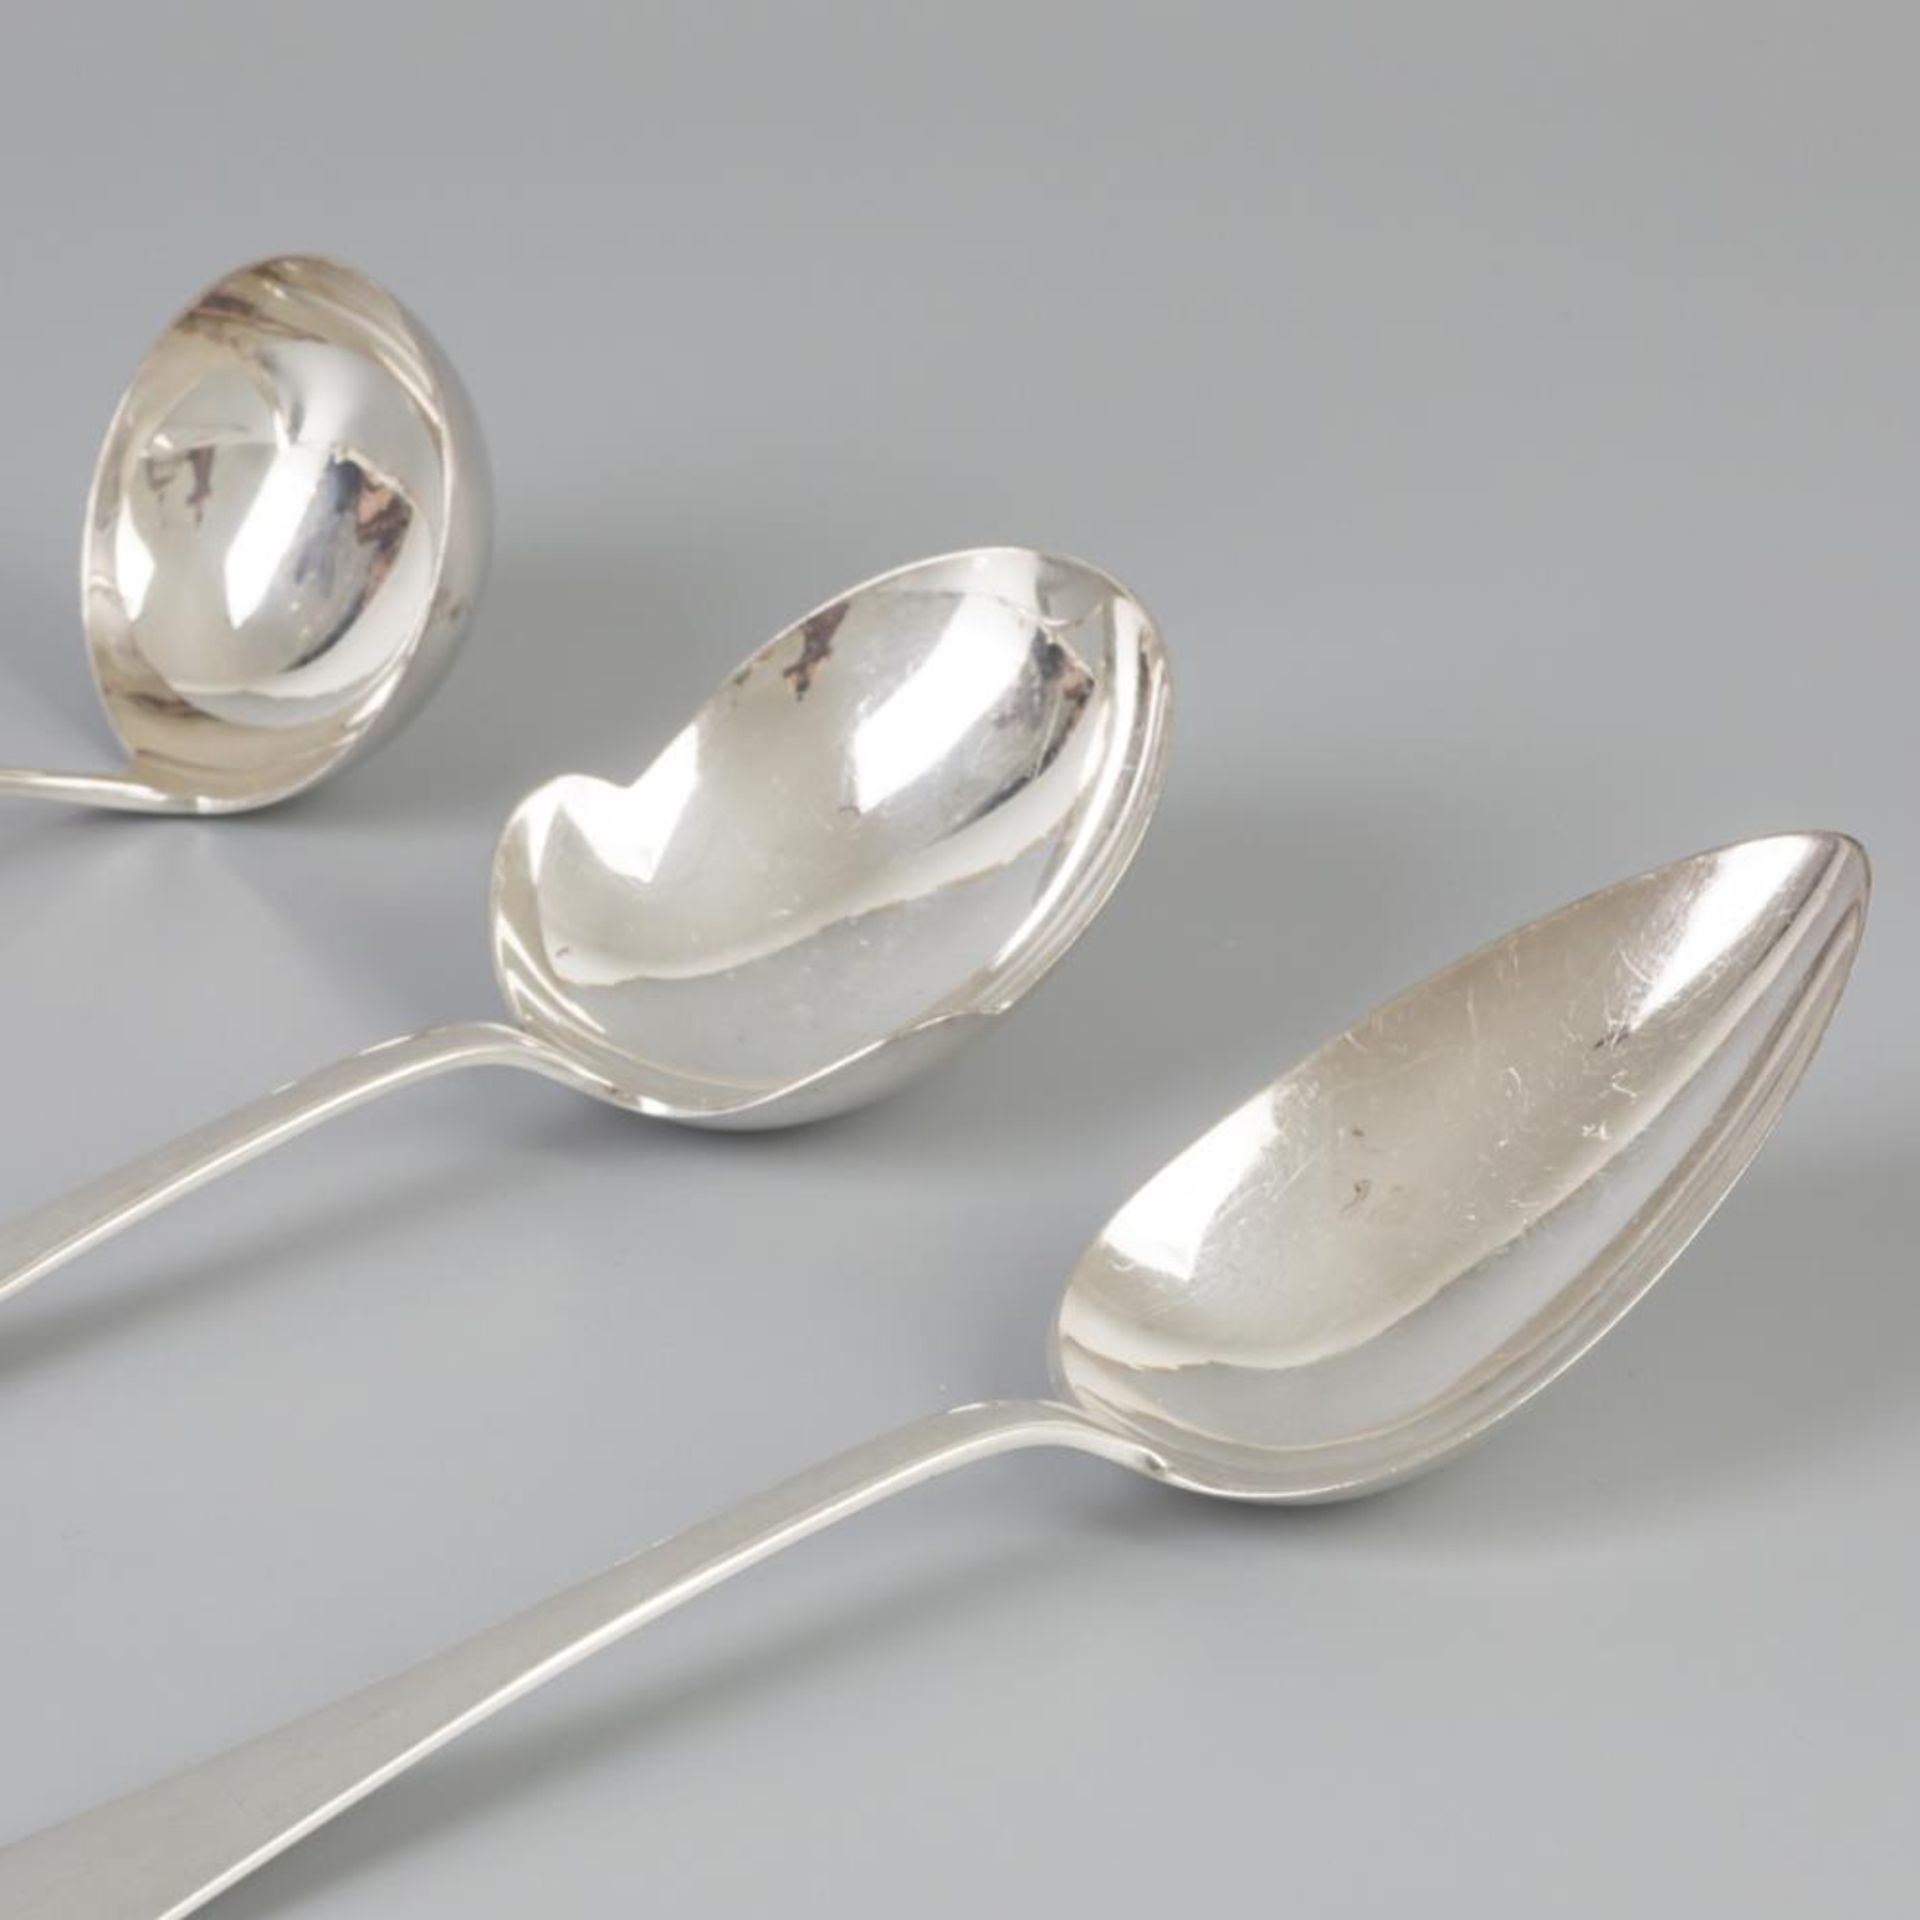 3 piece set of ladles "Haags Lofje" silver. - Image 2 of 7